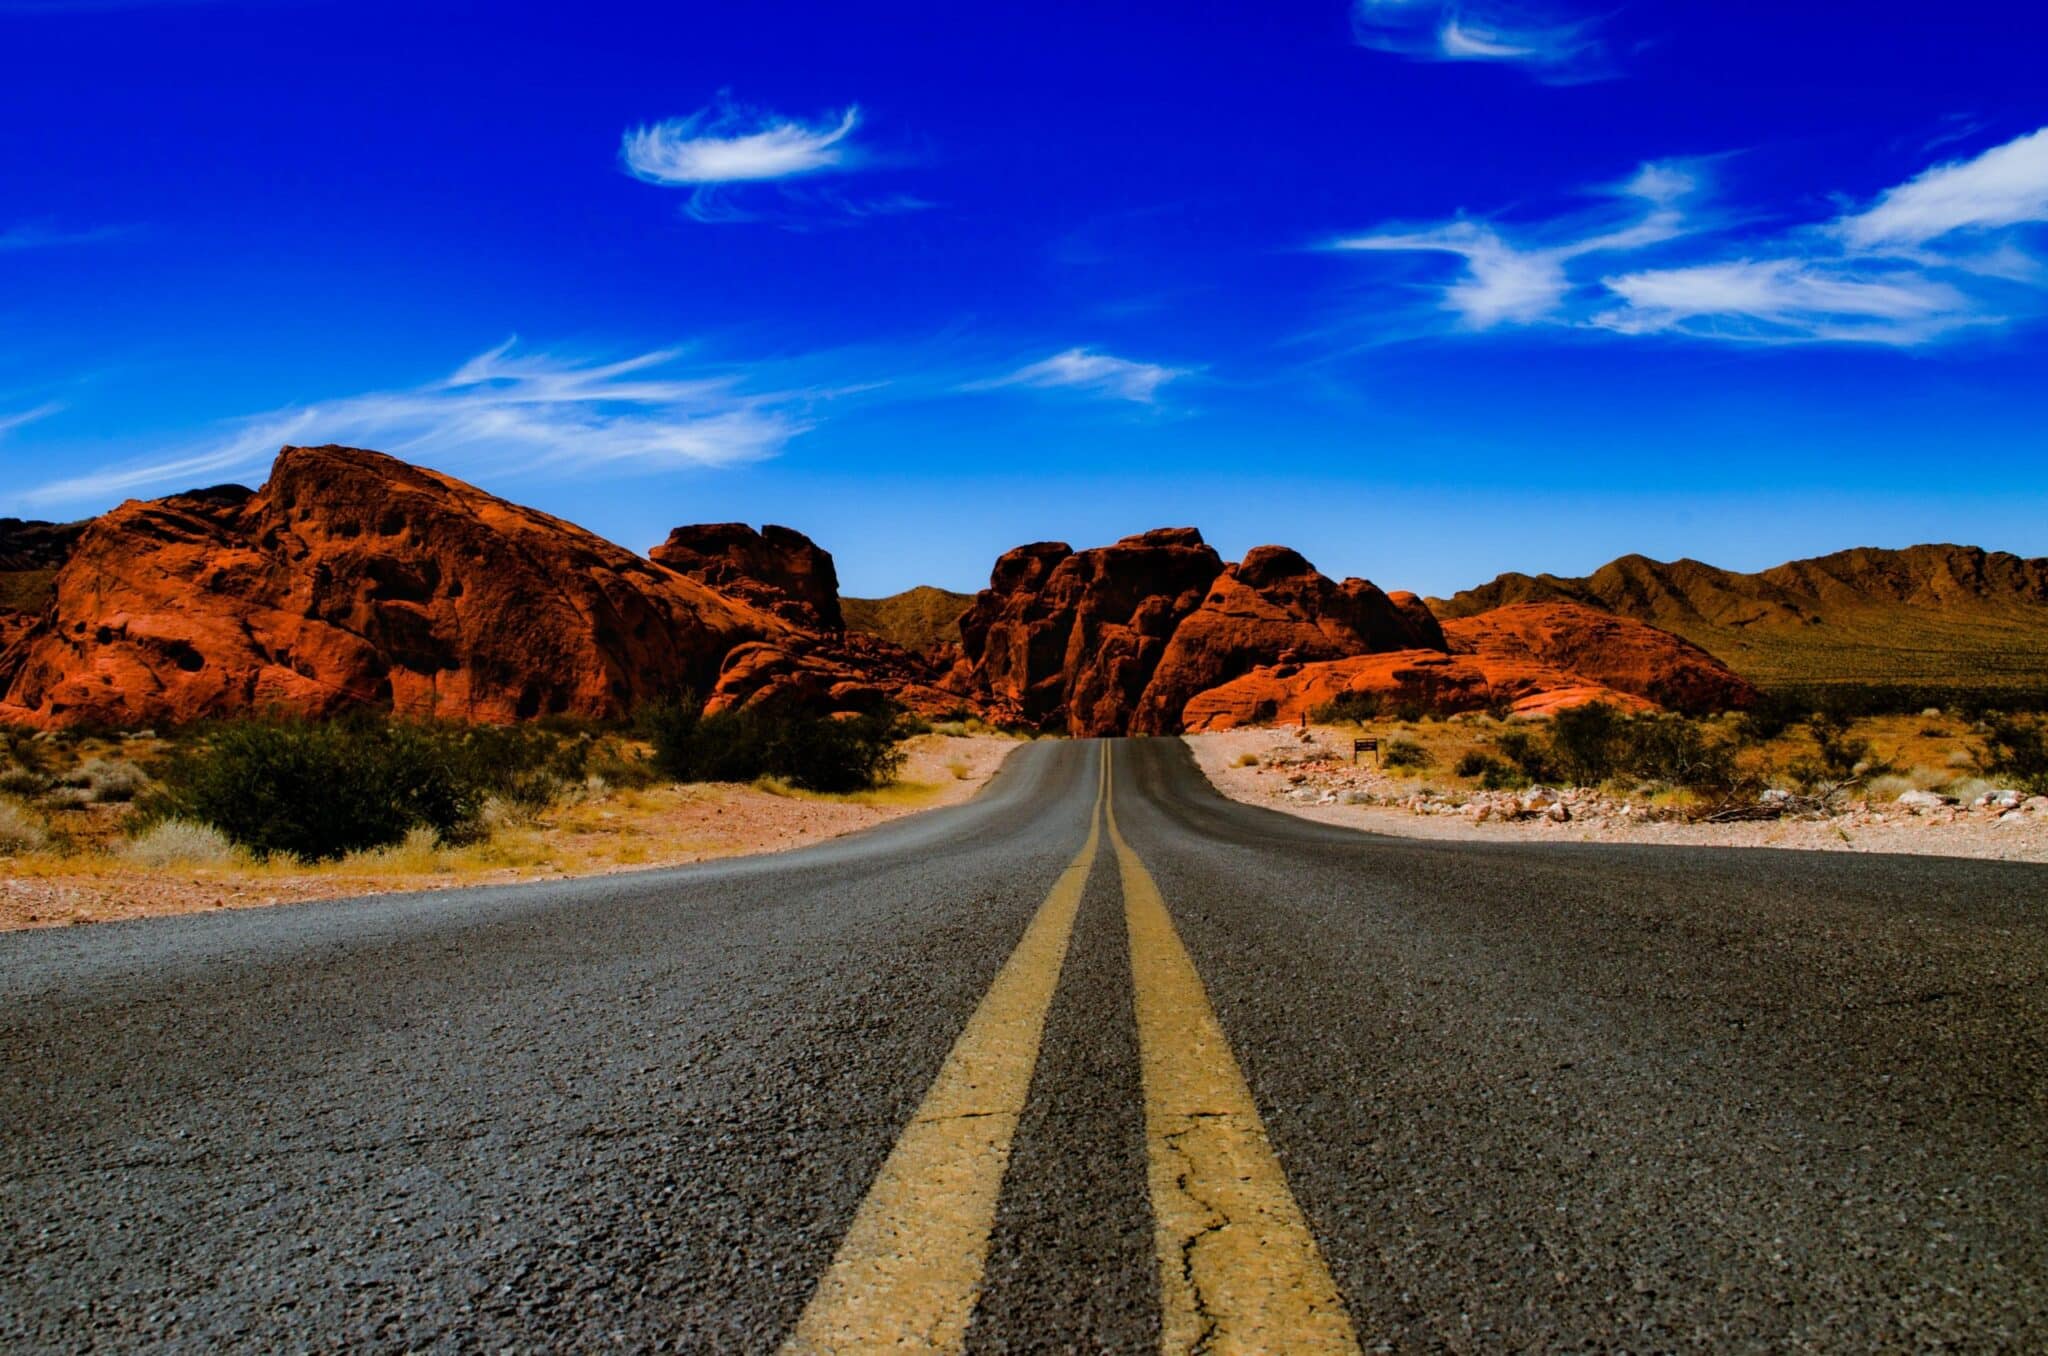 <p>While some never leave <a href="https://planneratheart.com/worldmark-las-vegas-boulevard/" rel="noopener">Las Vegas</a> during their vacation, consider a road trip along I-15 to Valley of Fire State Park.  The 100-mile round trip drive and 40,000-acre state park are perfectly sized for a day trip. See why this otherworldly place is the filming location for faraway lands in <a href="https://wealthofgeeks.com/star-trek-movies-ranked/">movies like Star Trek</a> and how the sun's rays on red sandstone rocks illuminate the valley like fire.</p>